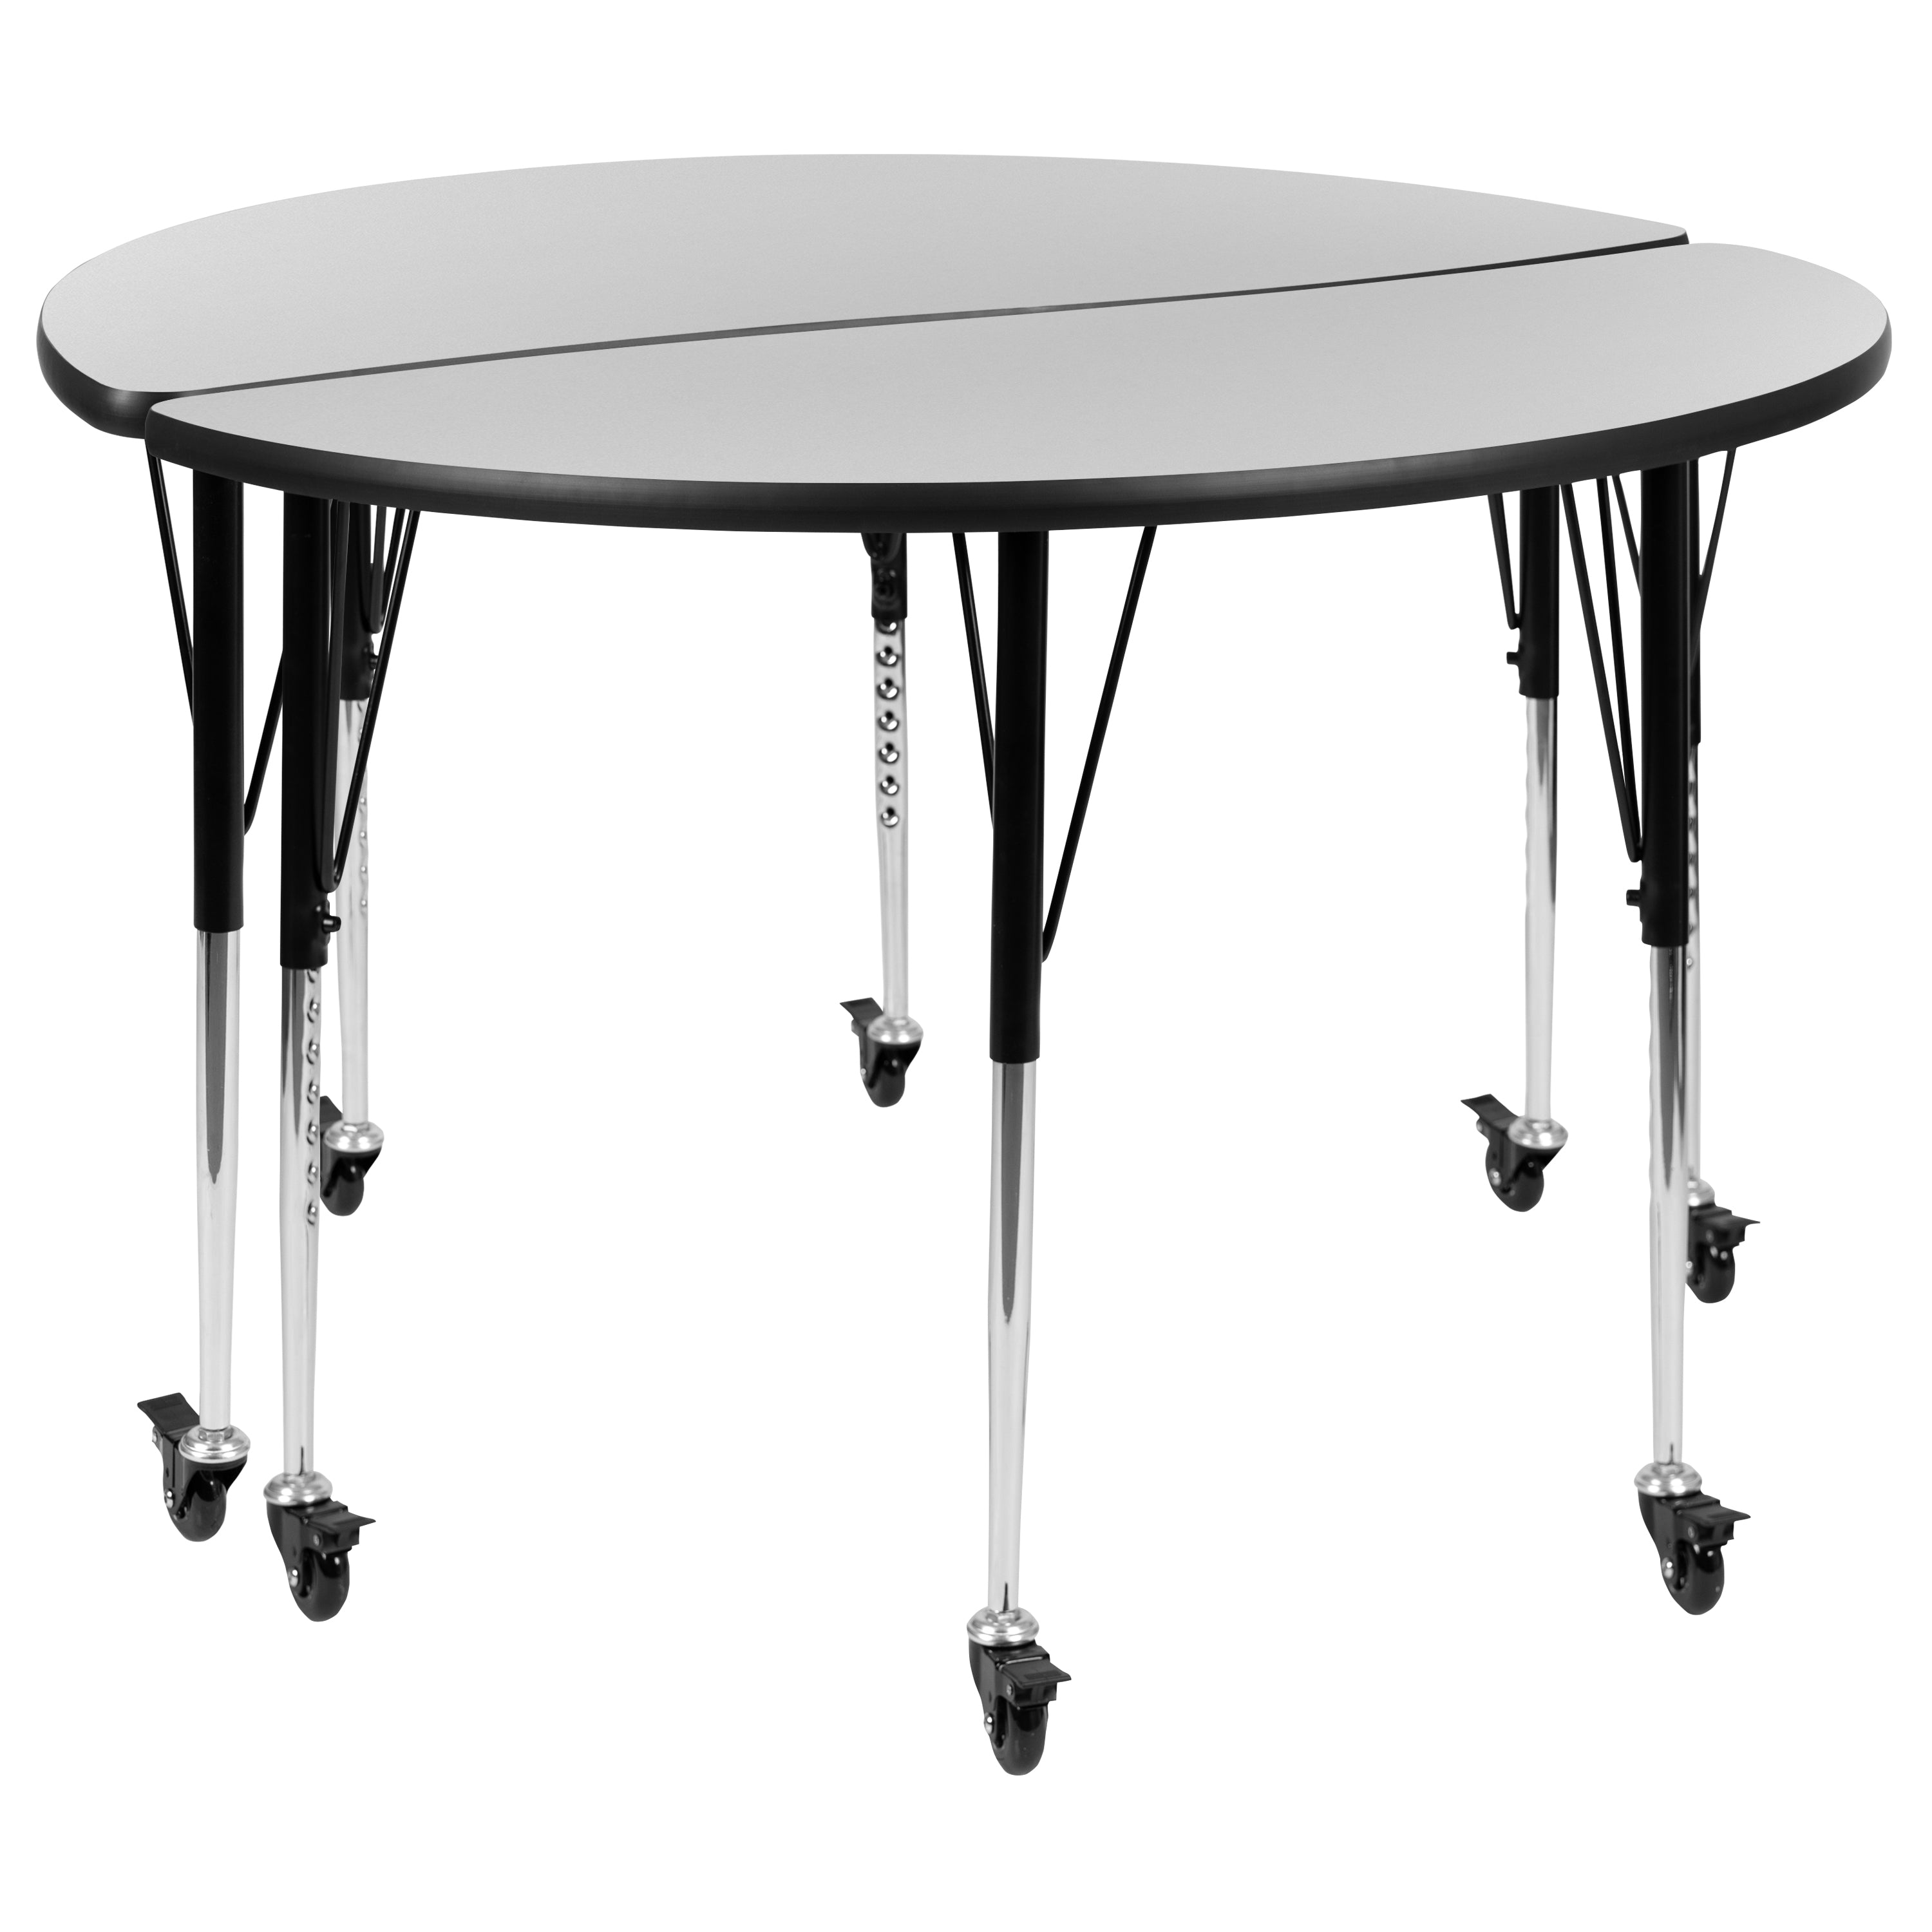 2 Piece Mobile 47.5" Circle Wave Flexible Grey Thermal Laminate Adjustable Activity Table Set-Collaborative Activity Table Set-Flash Furniture-Wall2Wall Furnishings